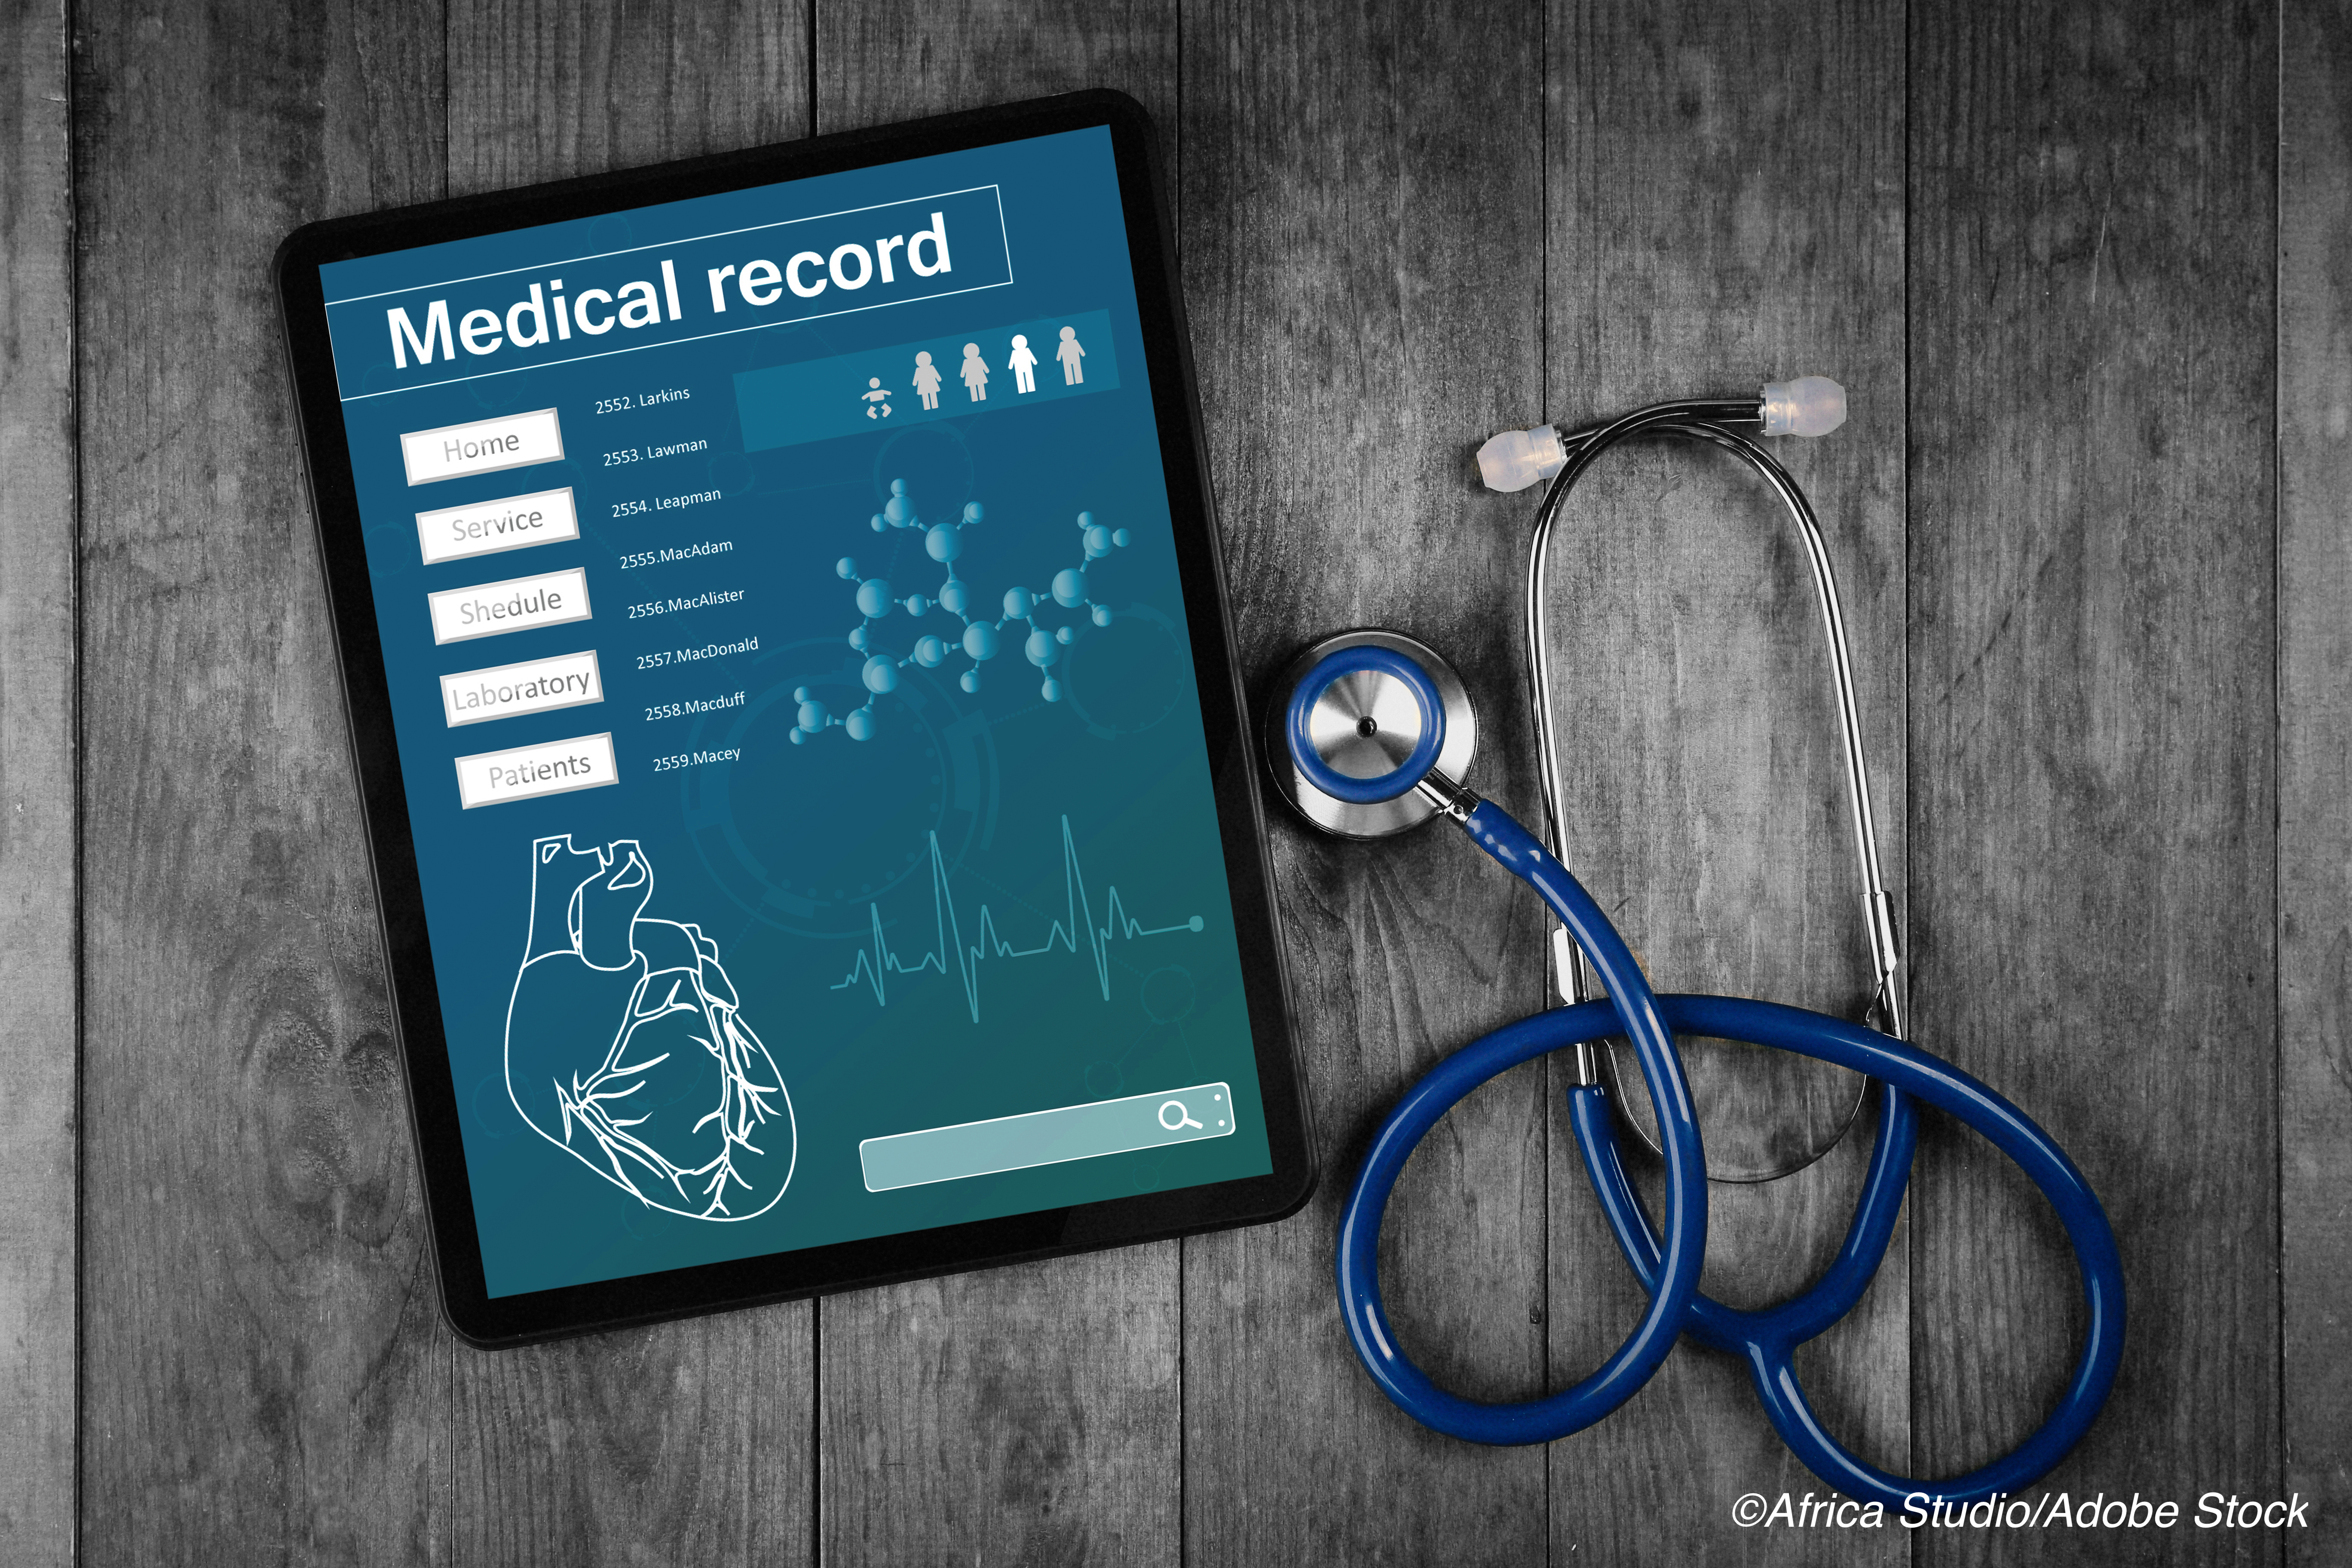 Are Electronic Health Record Data  Viable Research Tools?